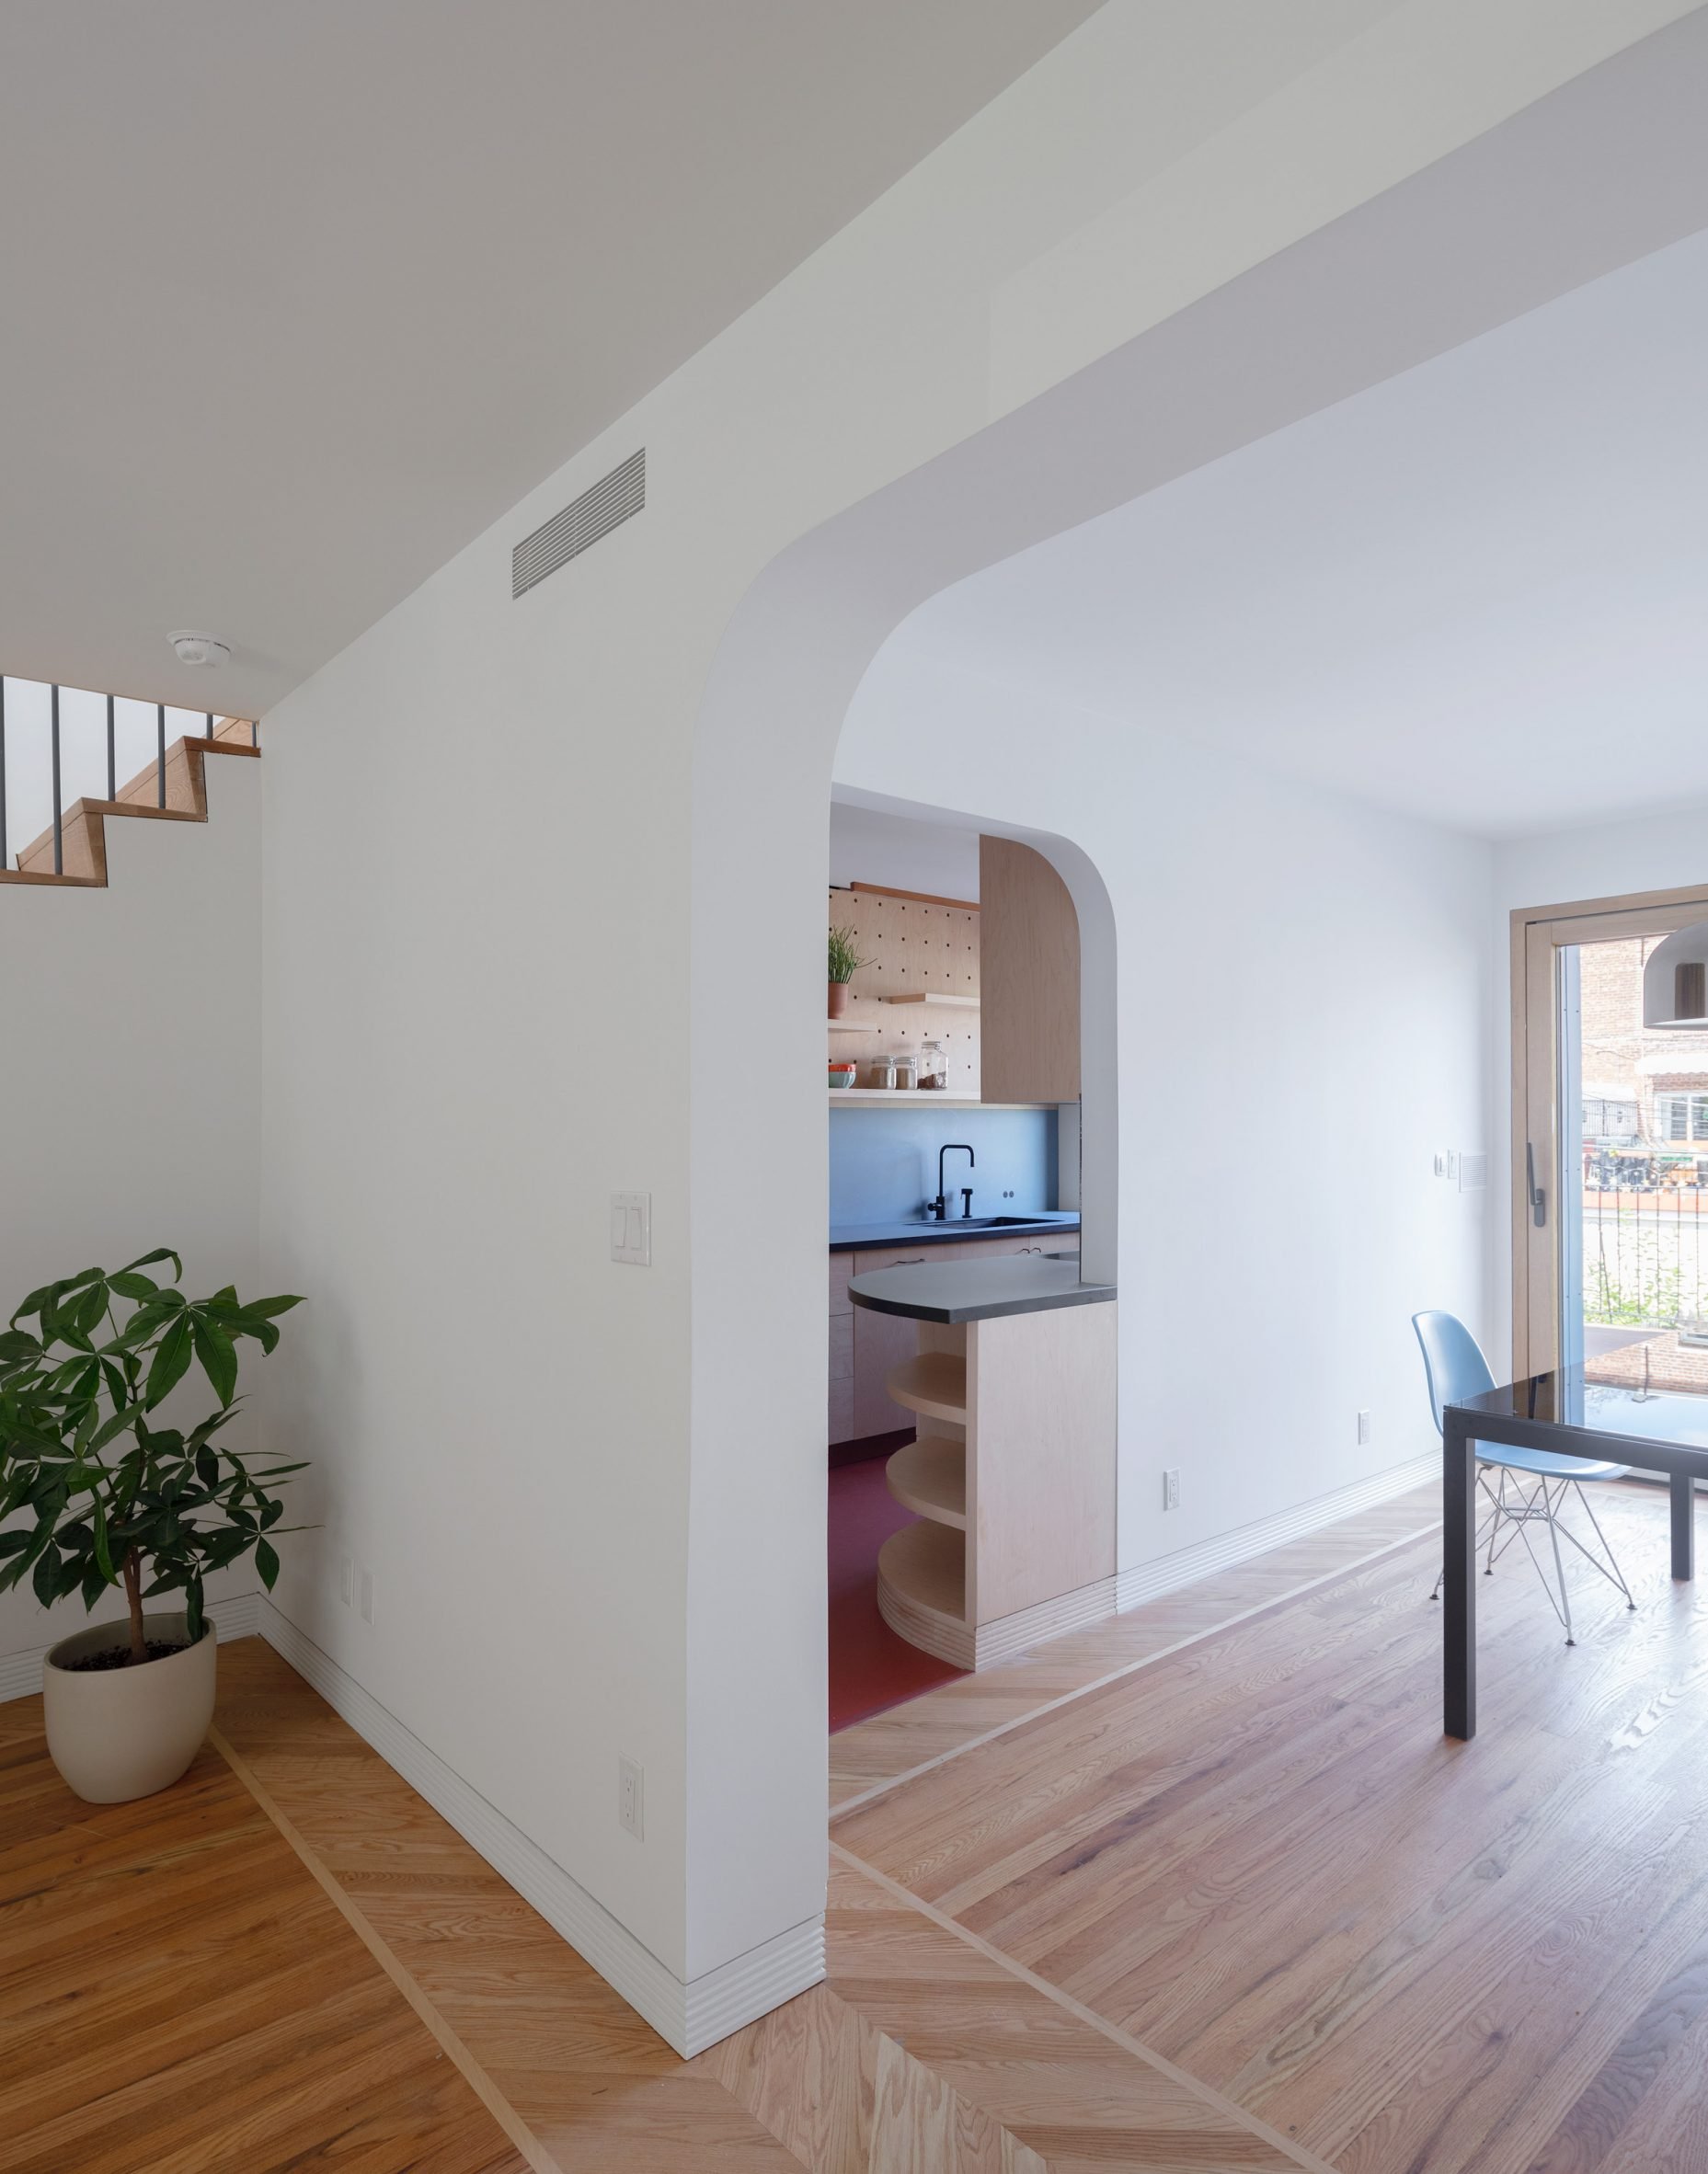 Ground floor of a renovated terraced house in Queens